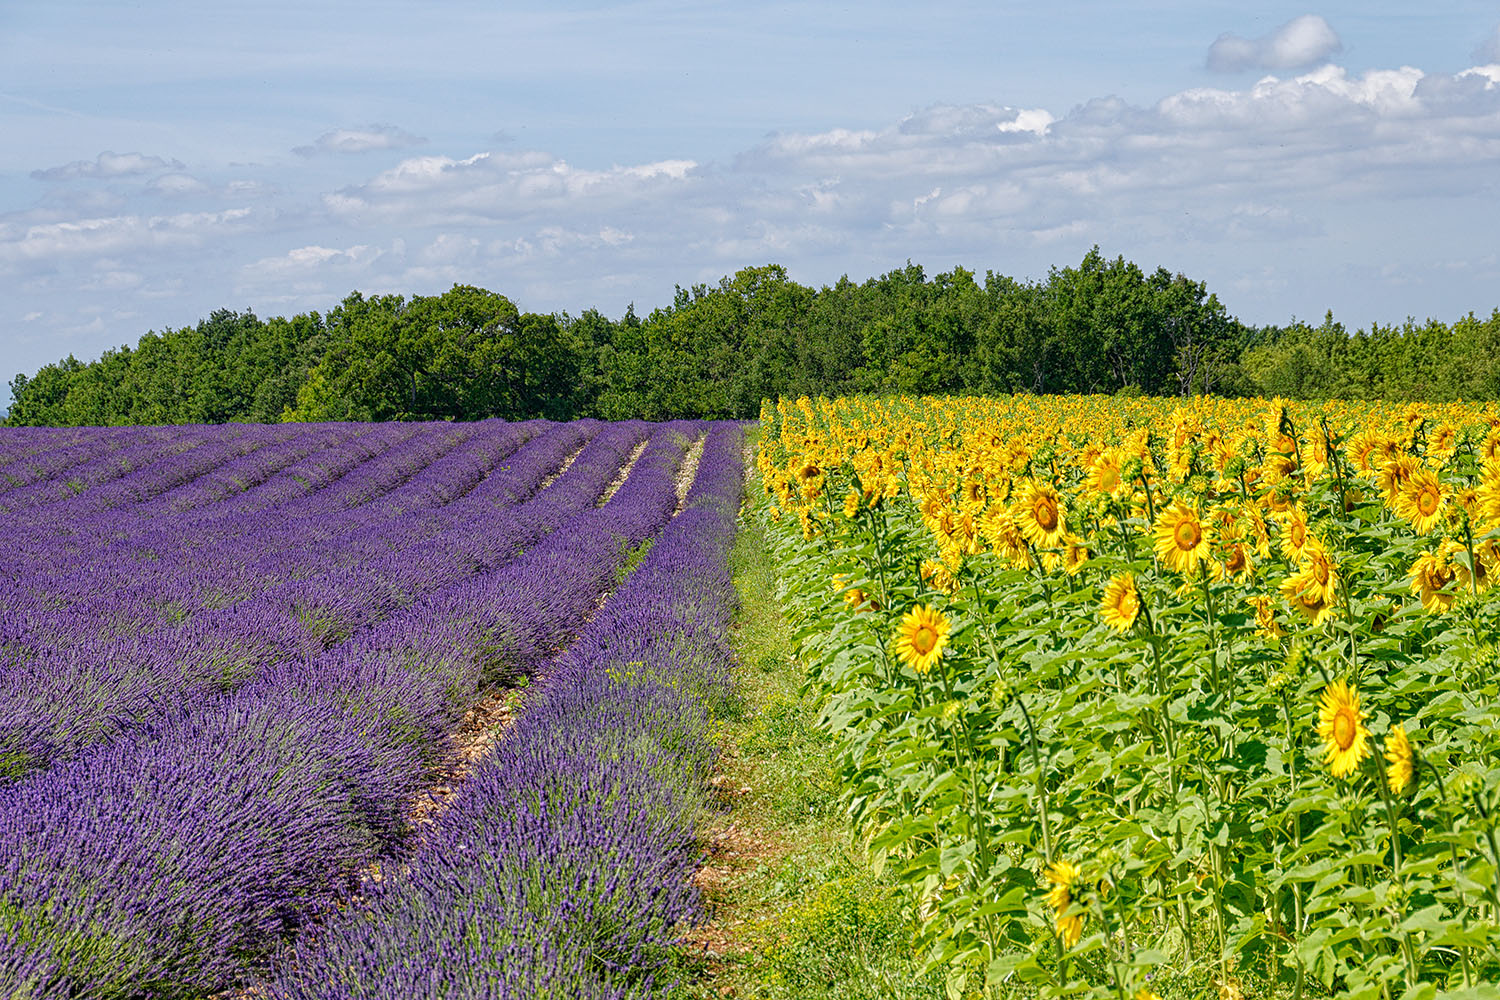 The color combinations one observes on the 'Plateau de Valensole' are just amazing!